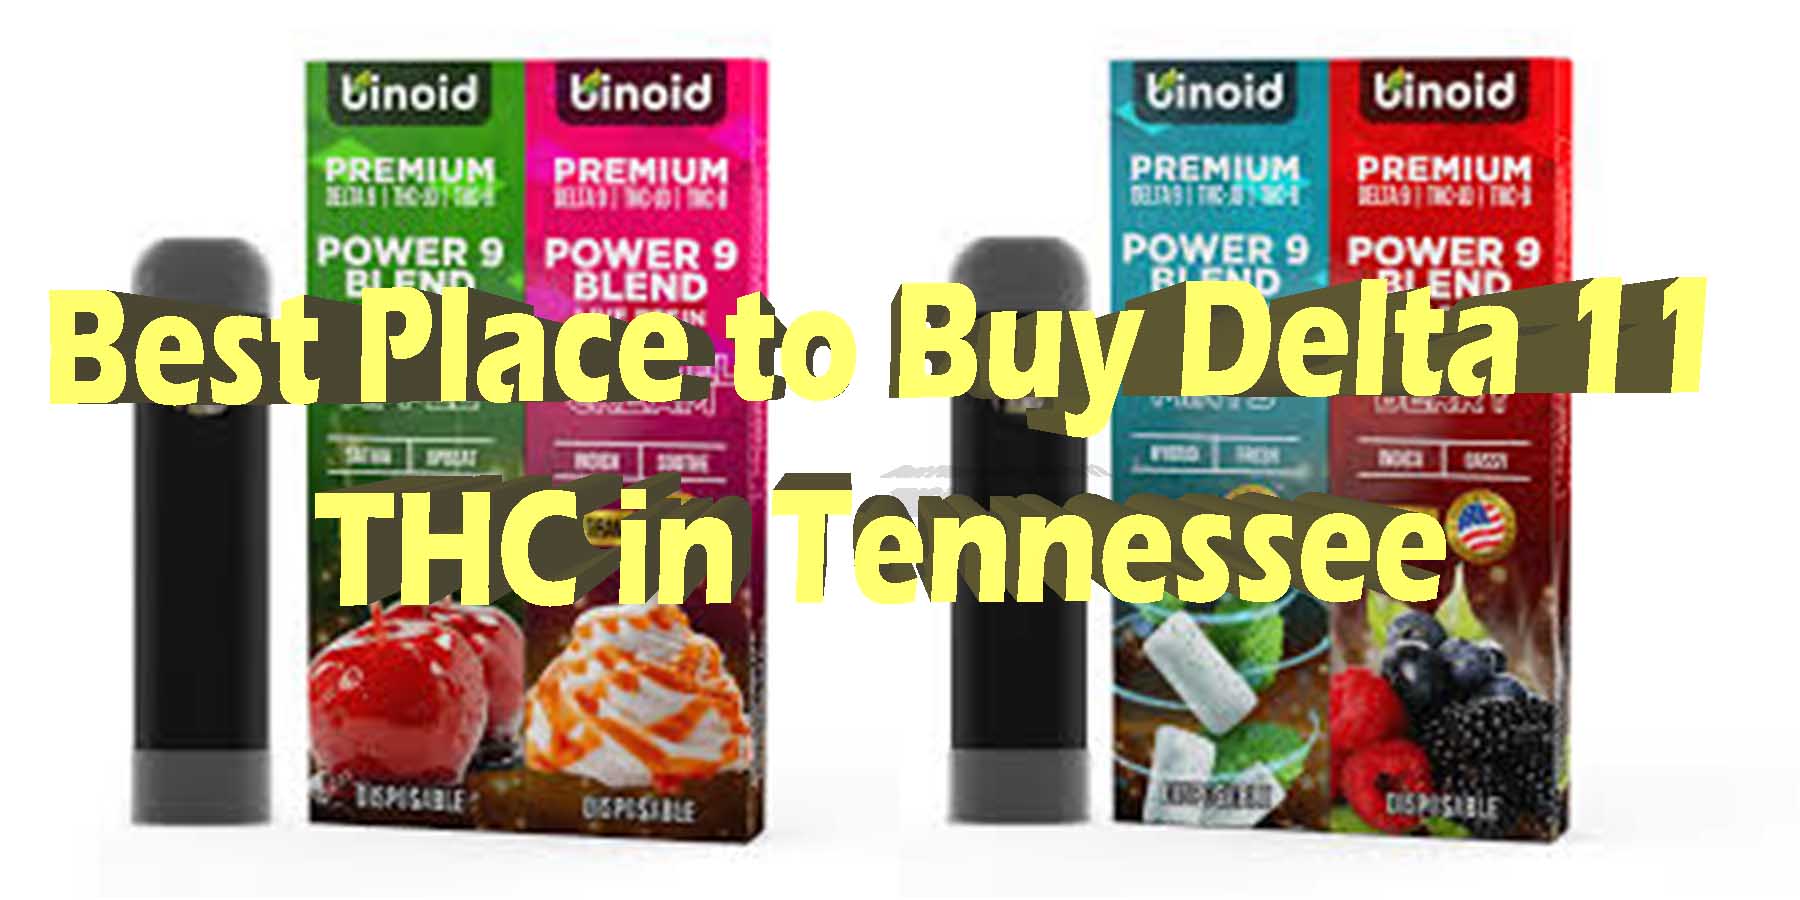 Best Place to Buy Delta 11 THC in Tennessee HowToGetNearMe BestPlace LowestPrice Coupon THC THCA Where To Buy Strongest New D8 D9 OnlineSmokeShop Best In The Market Cheapest Binoid.